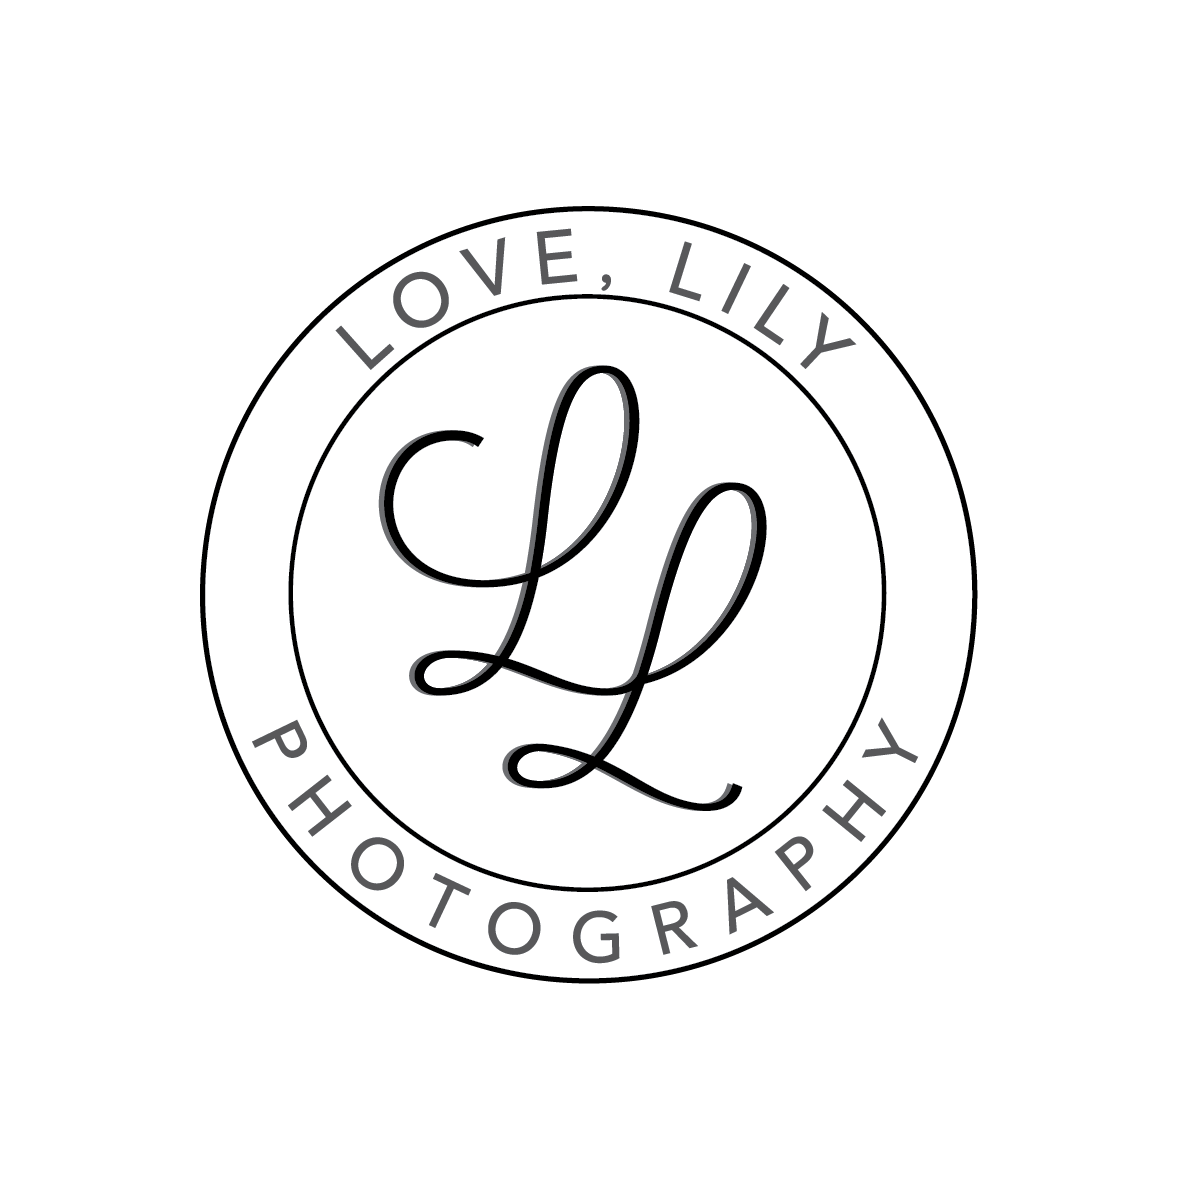 LOVE, LILY PHOTOGRAPHY